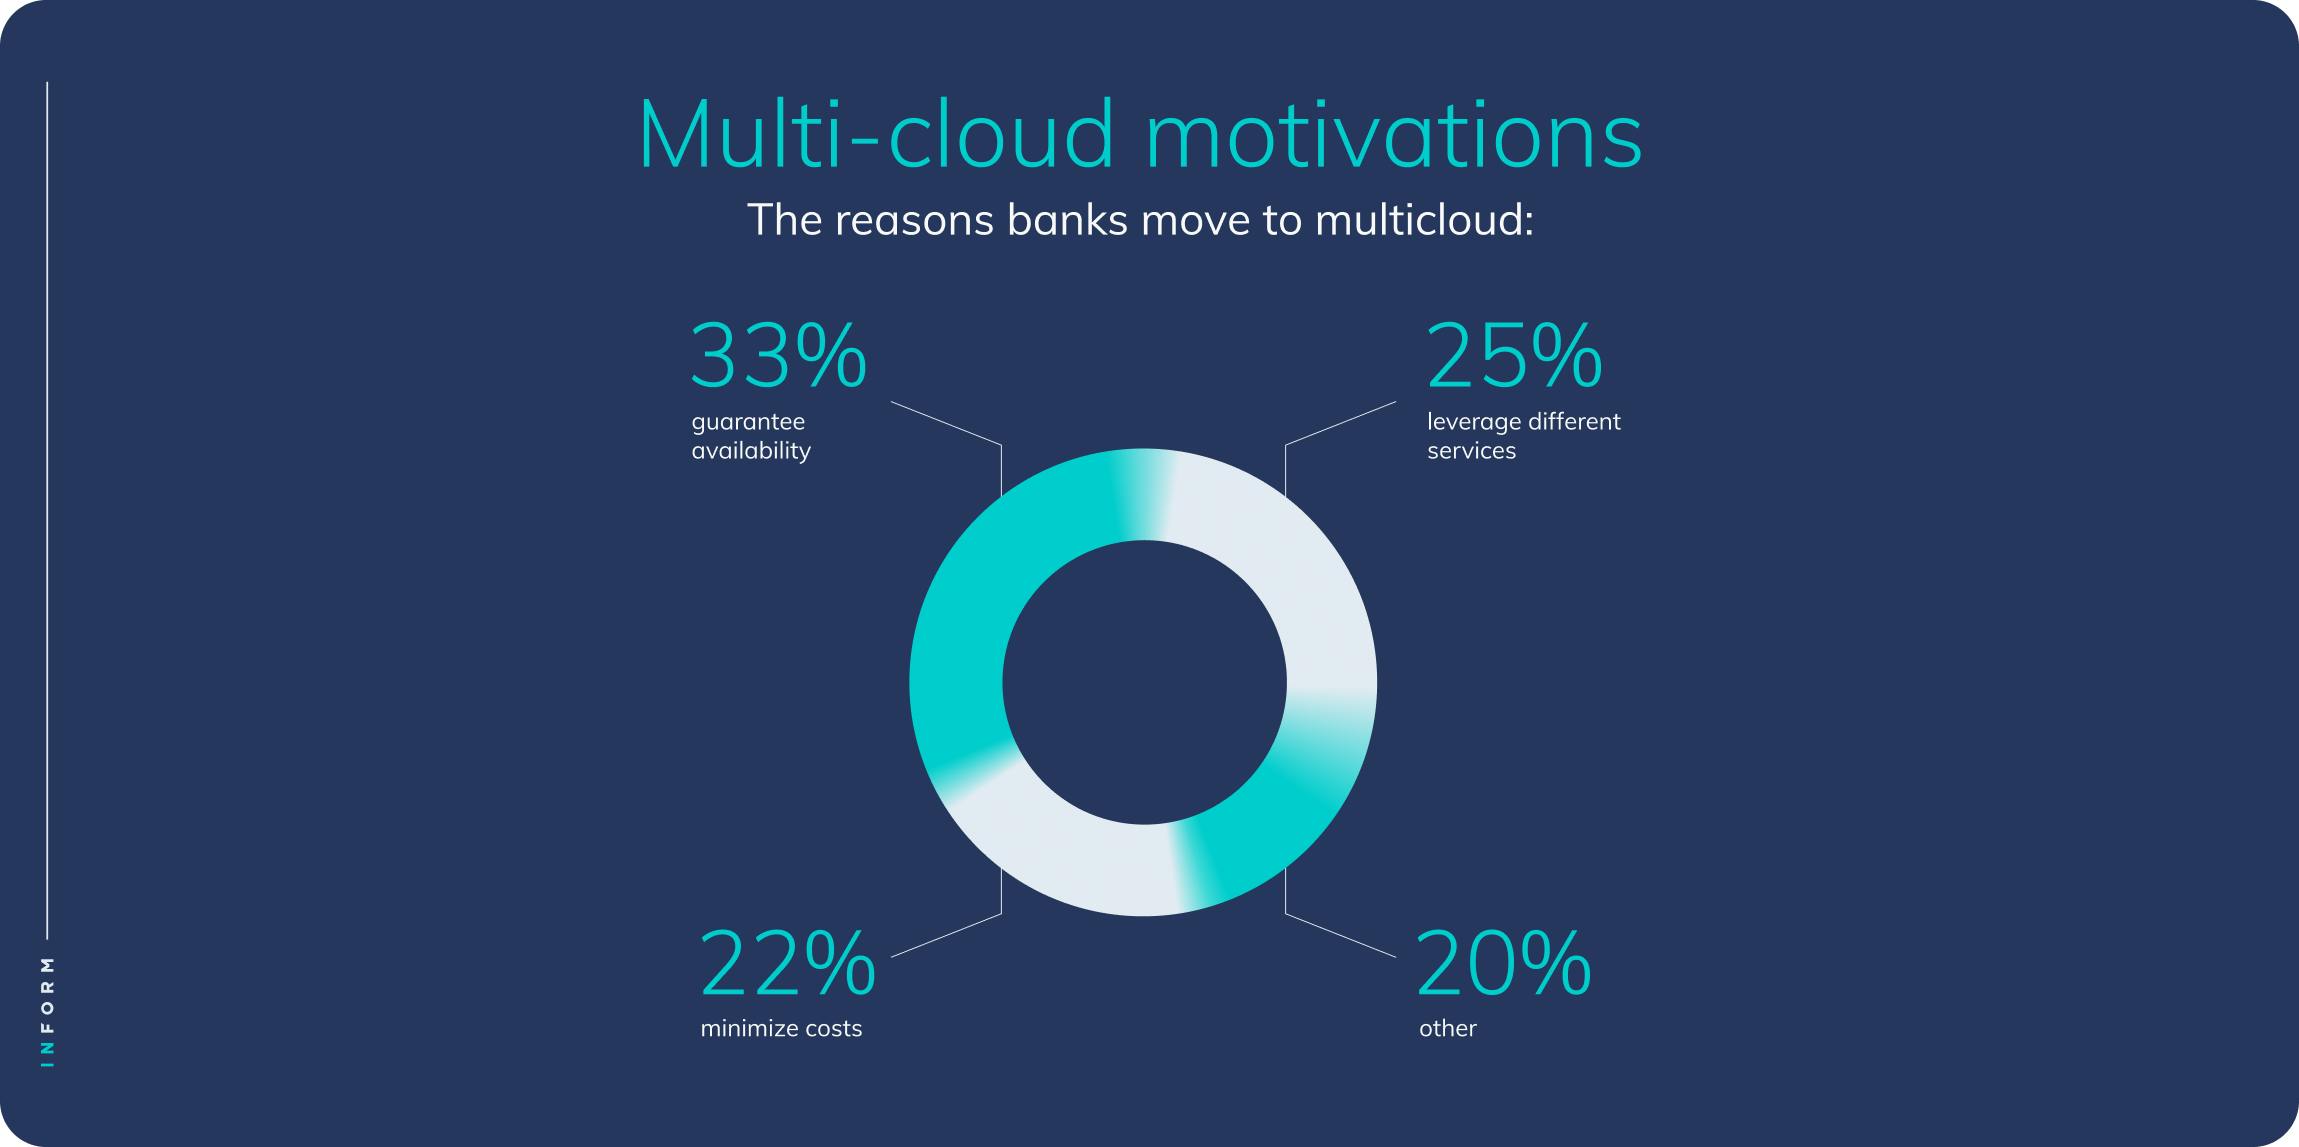 statistic showing the motivations of banks who move to multi-cloud. 